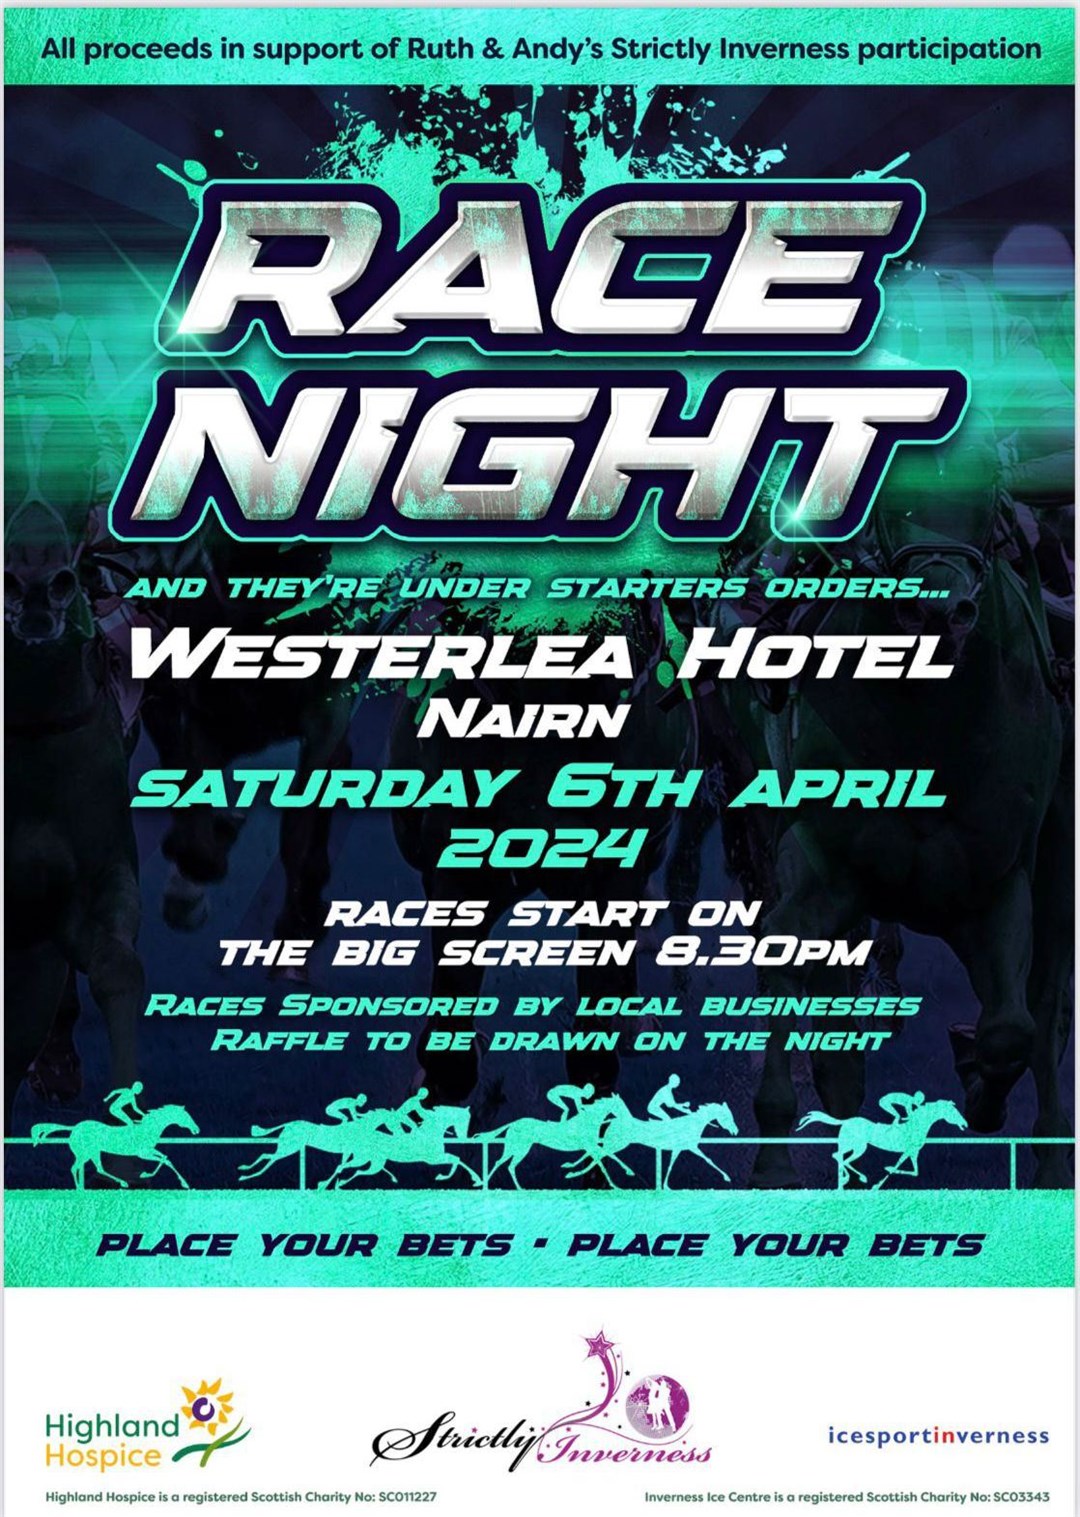 Ruth has planned a race night for April 8.